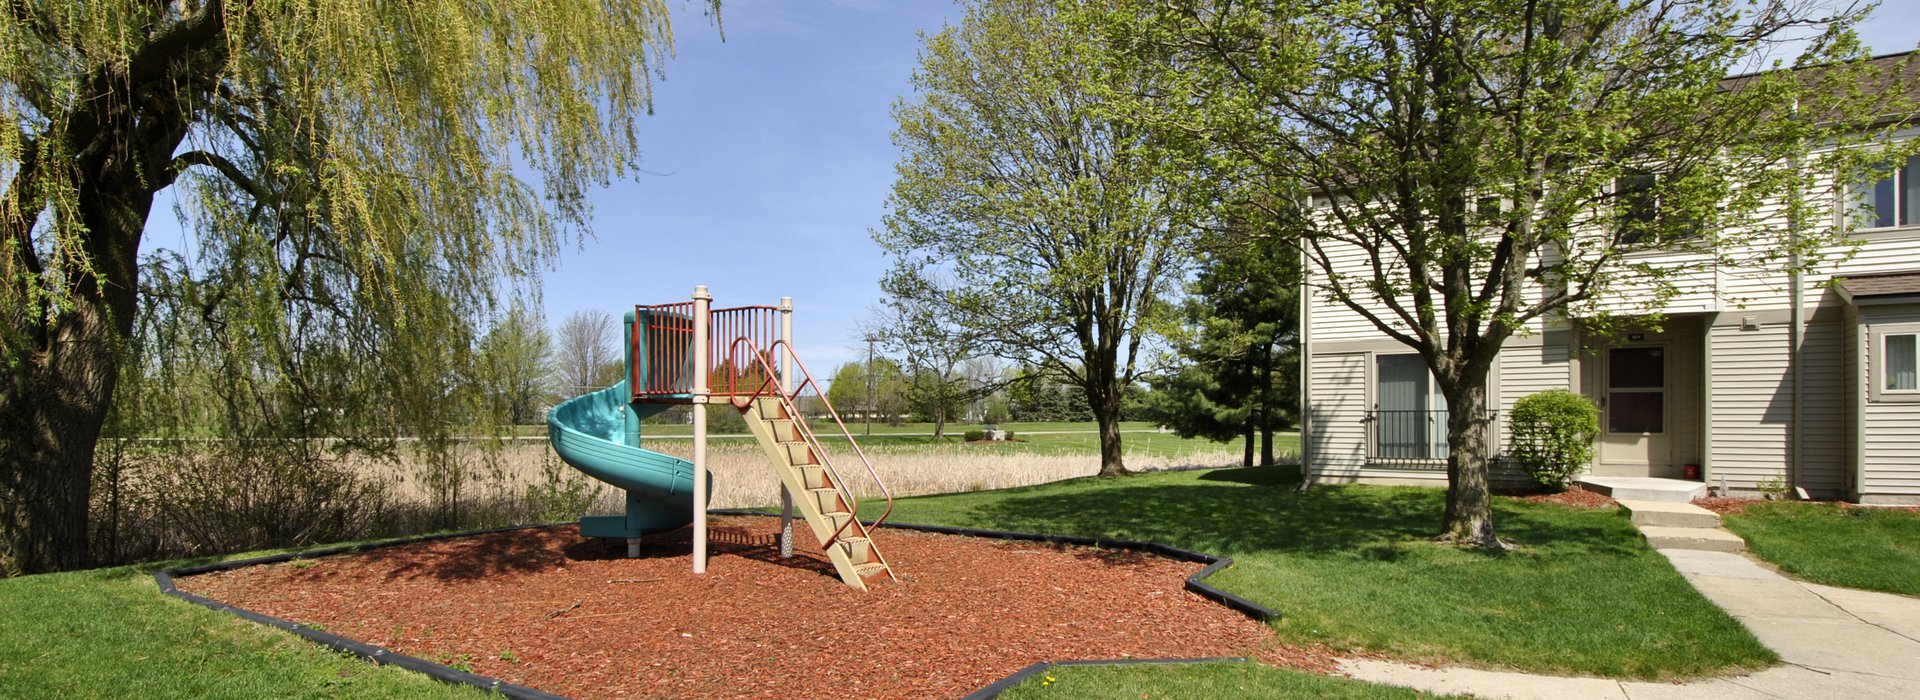 Playground area with slide for children